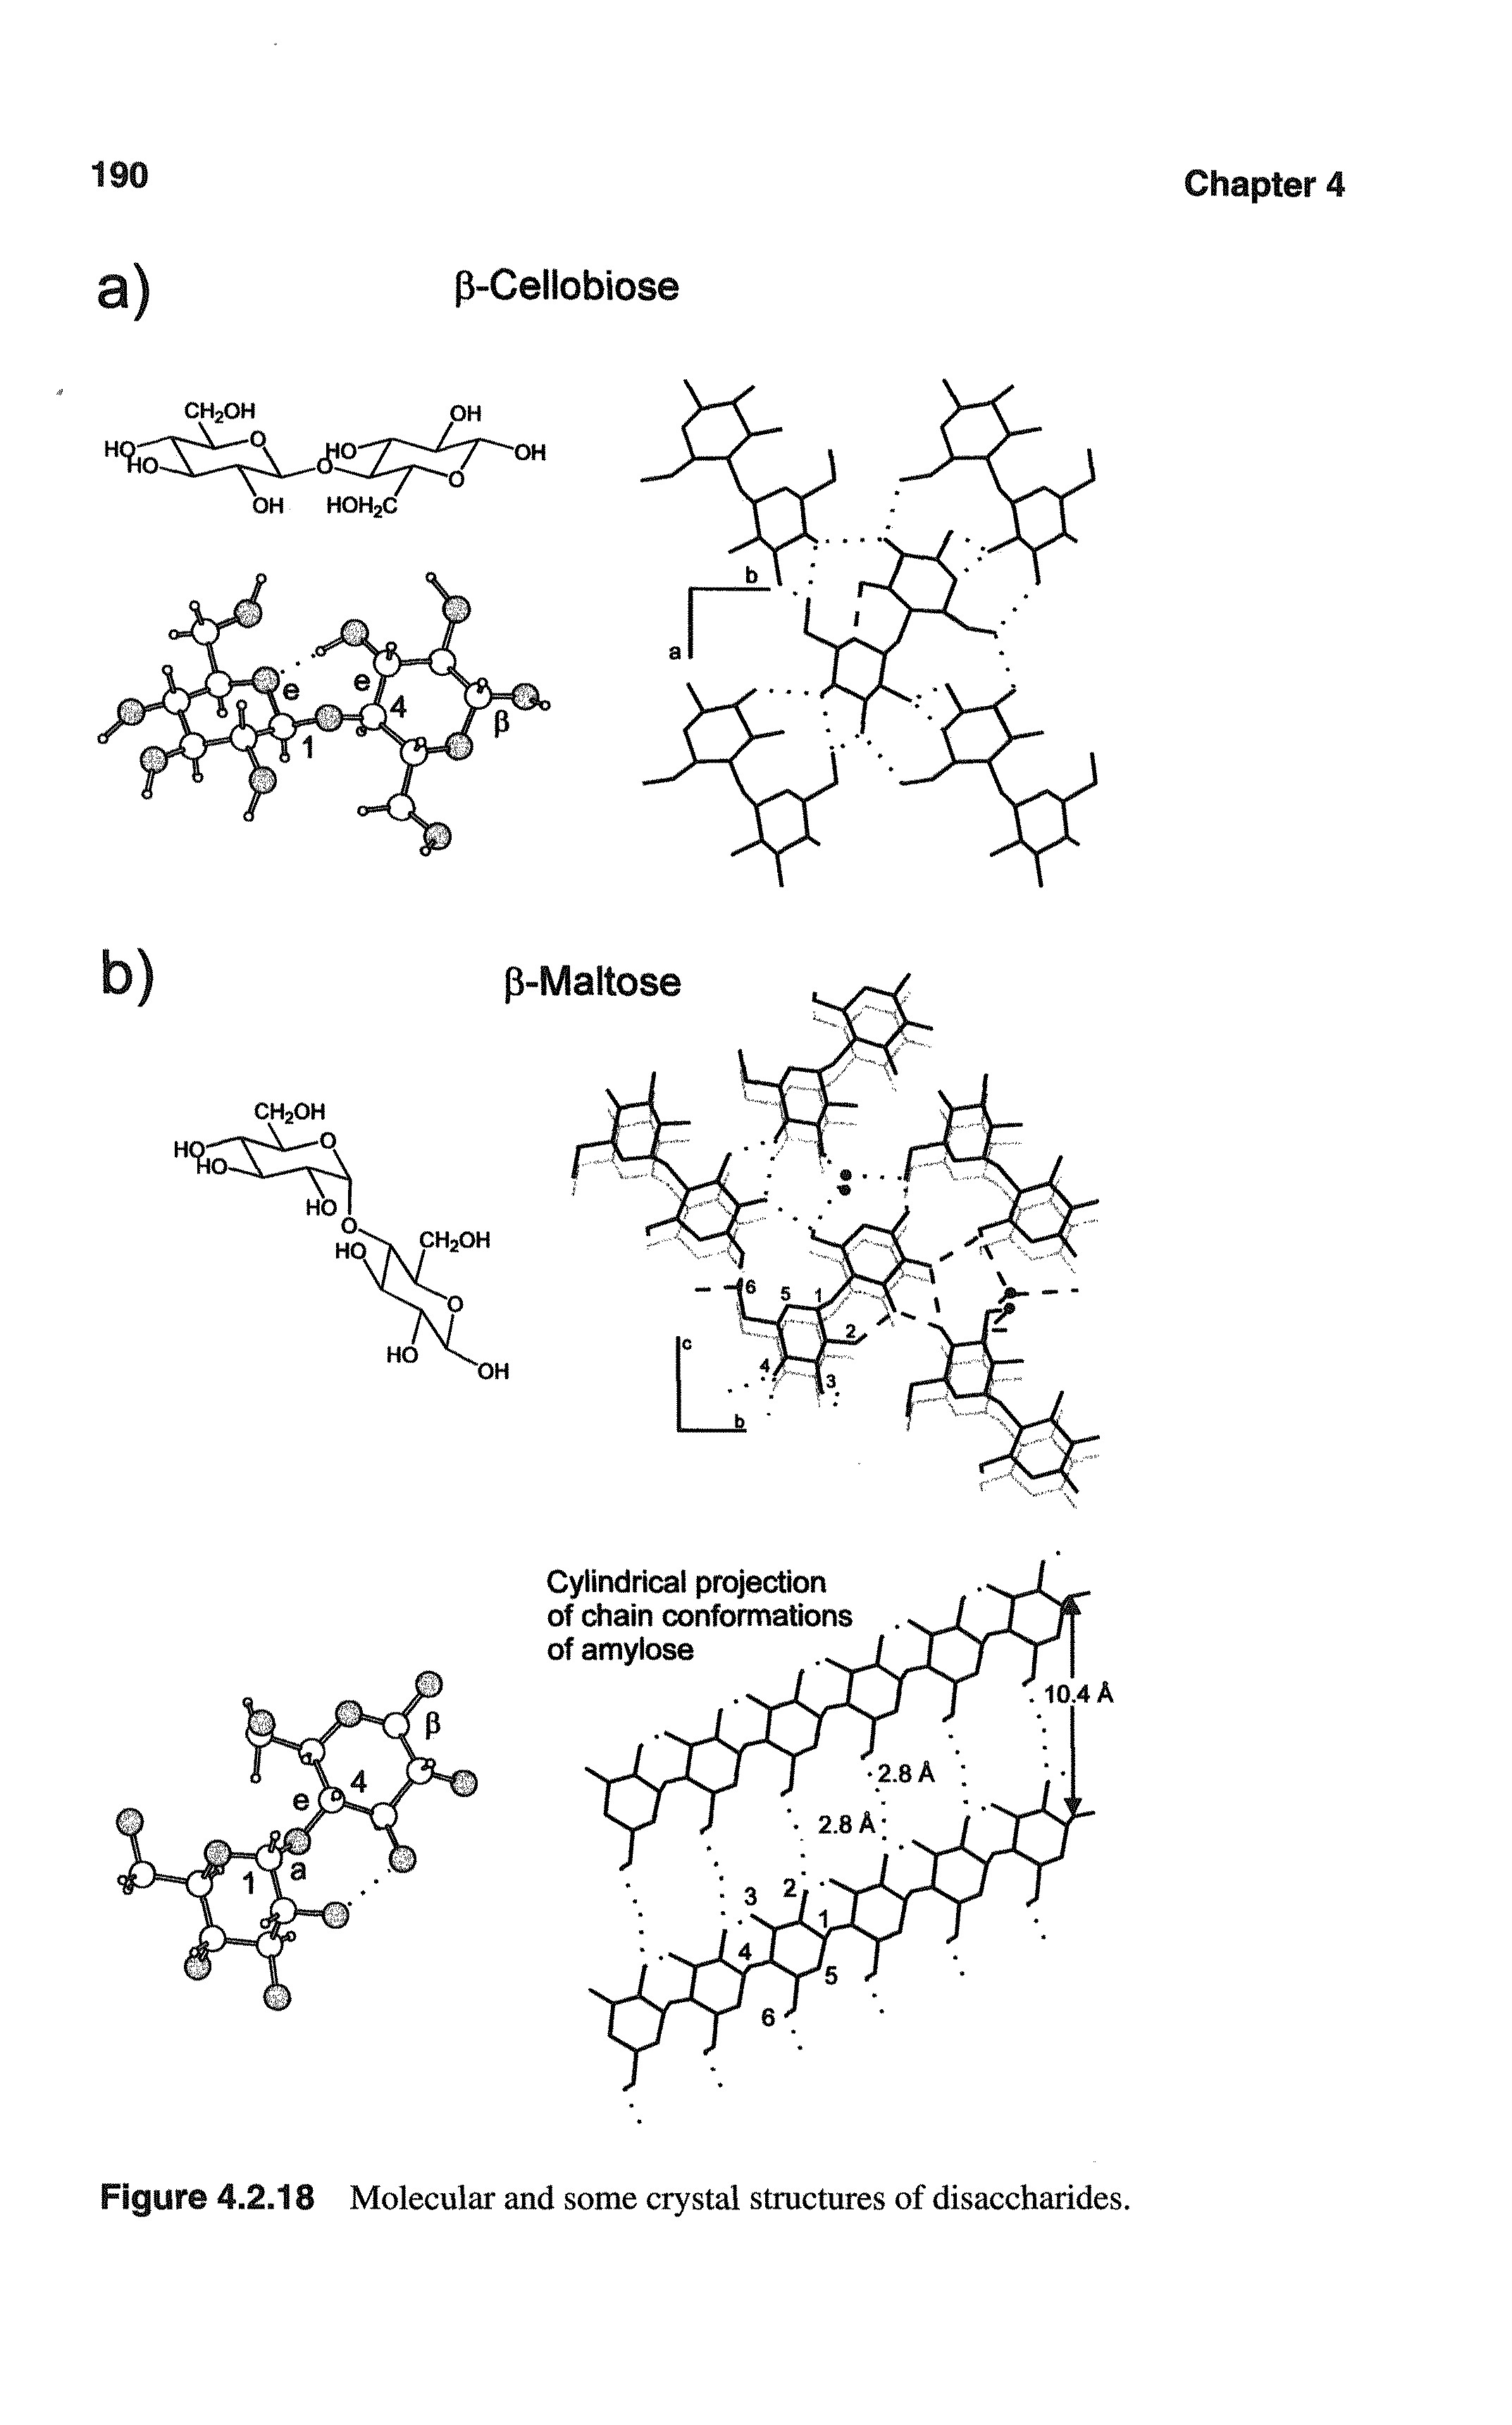 Figure 4.2.18 Molecular and some crystal structures of disaccharides.